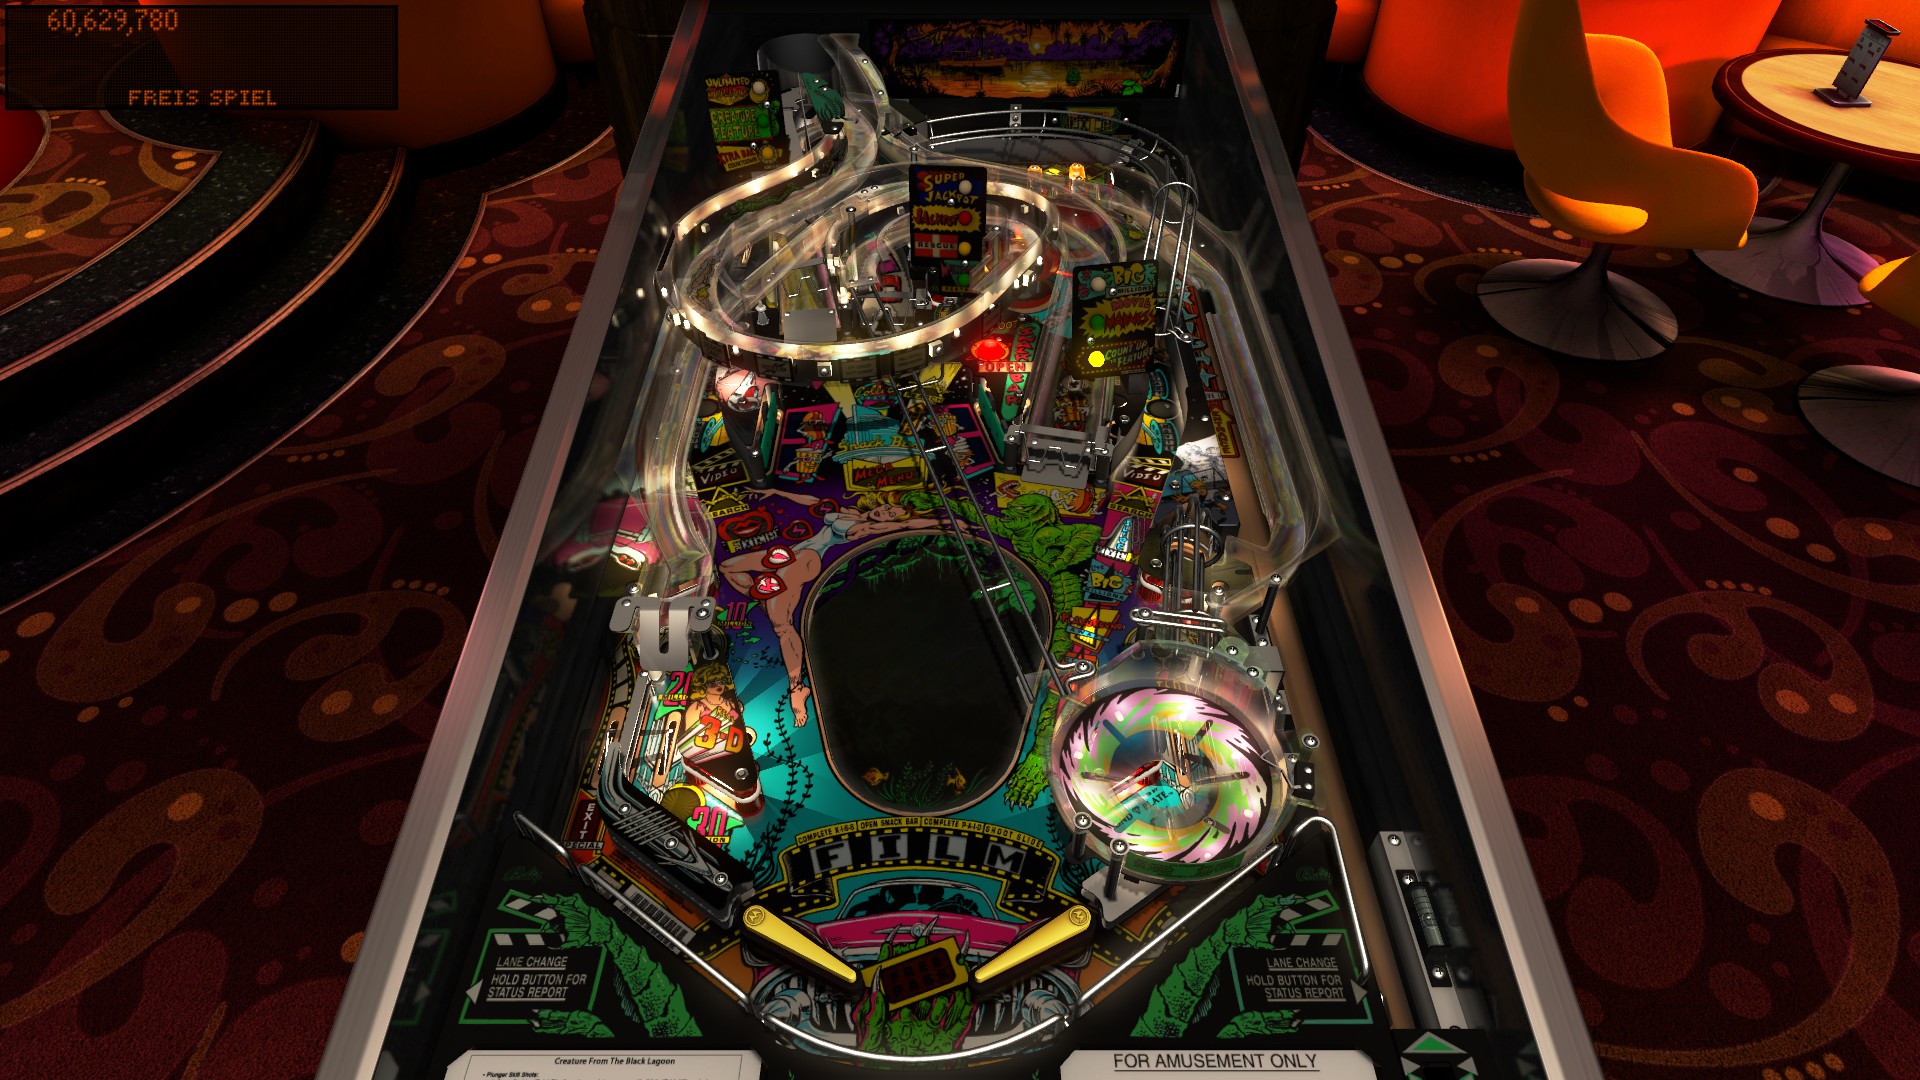 e2e4: Pinball FX3: The Creature From The Black Lagoon [Tournament] (PC) 60,629,780 points on 2022-05-19 20:15:40